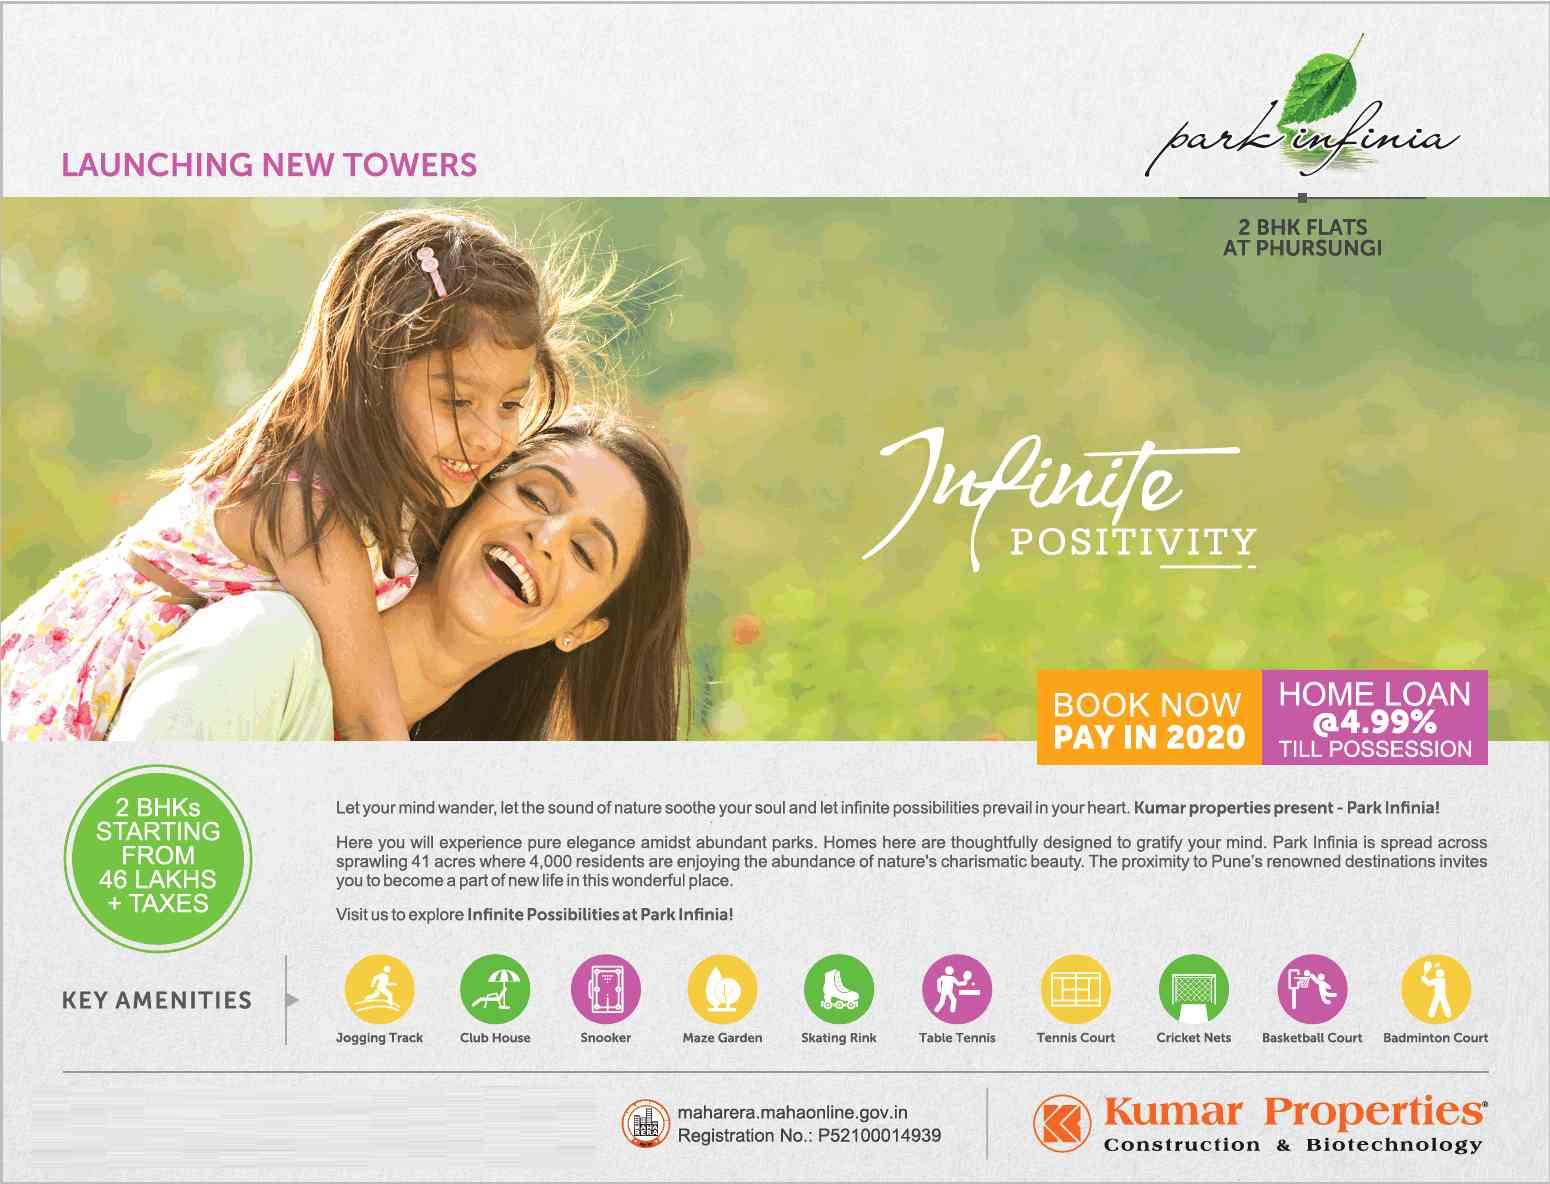 Book now & pay in 2020 with home loan @ 4.99% till possession at Kumar Park Infinia in Pune